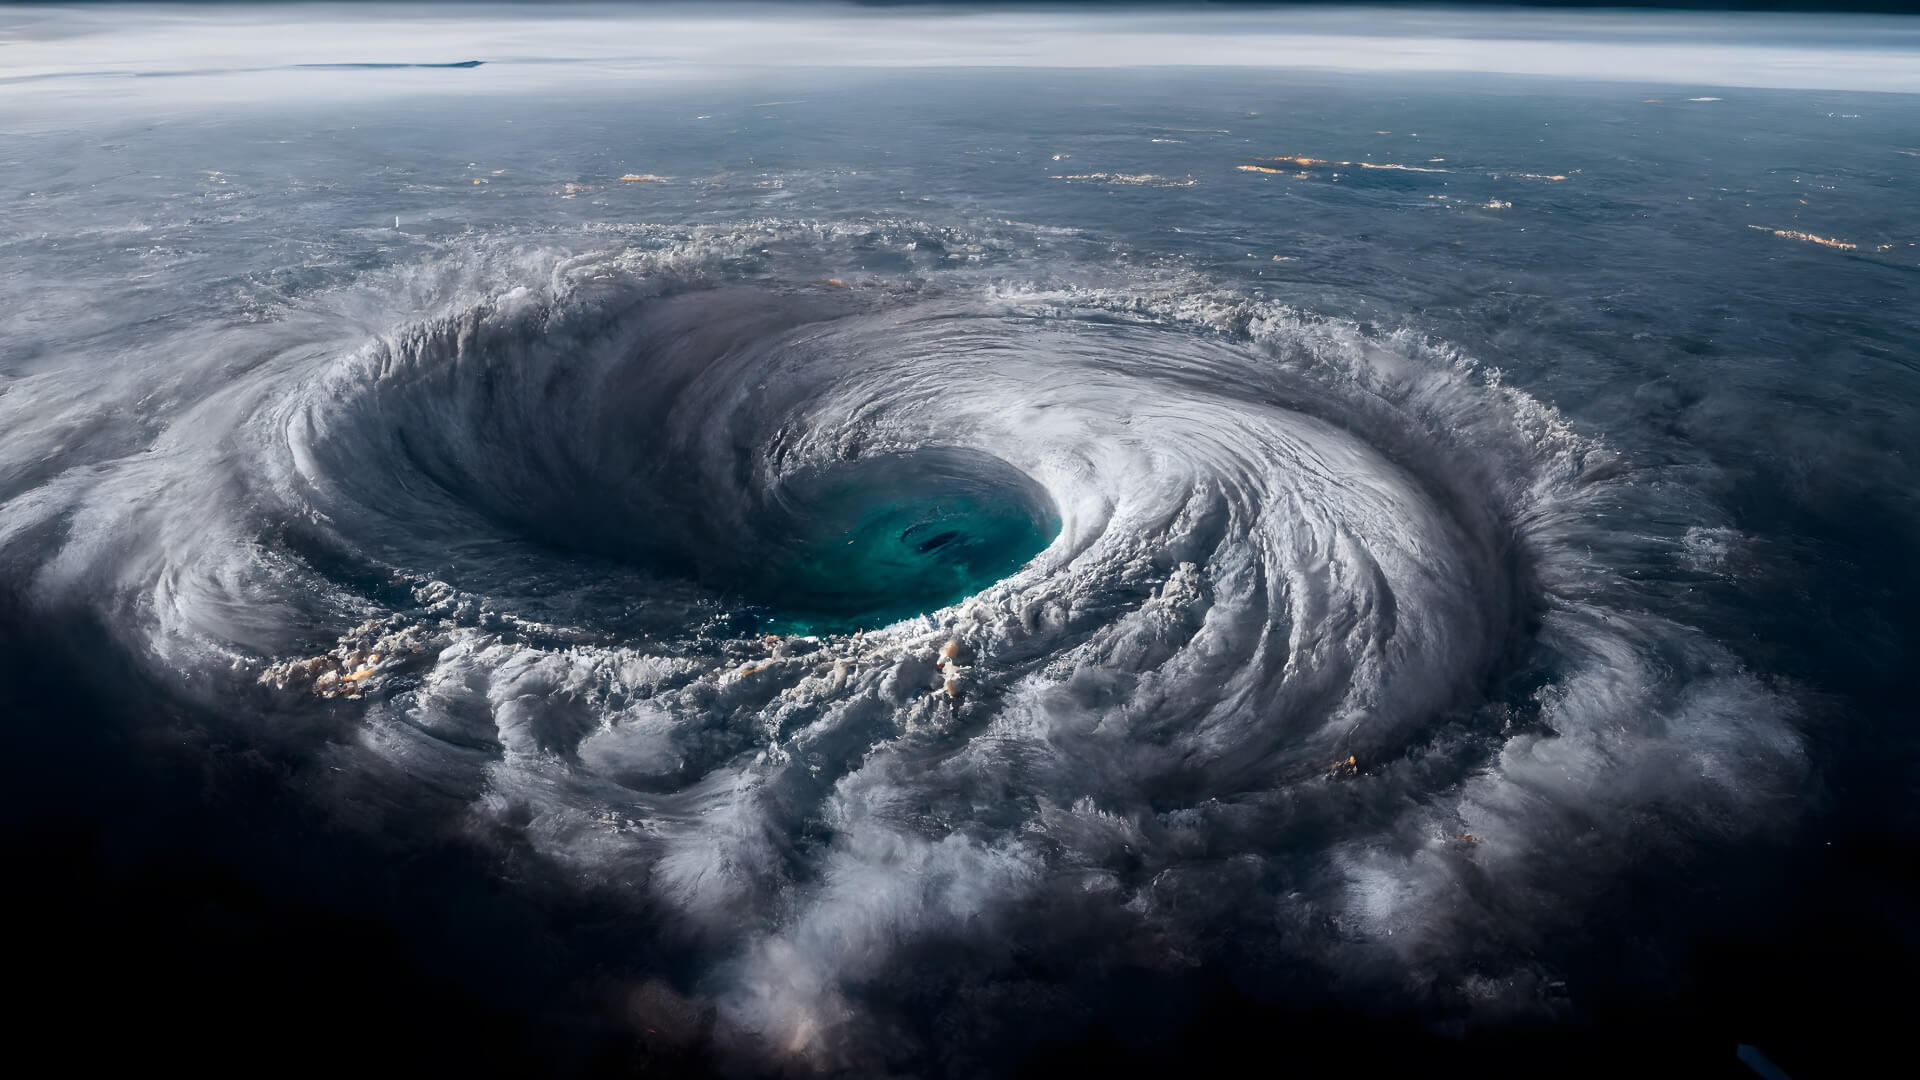 A hurricane is viewed from space as a mass spiral of clouds with a large, clear eye in the centre.